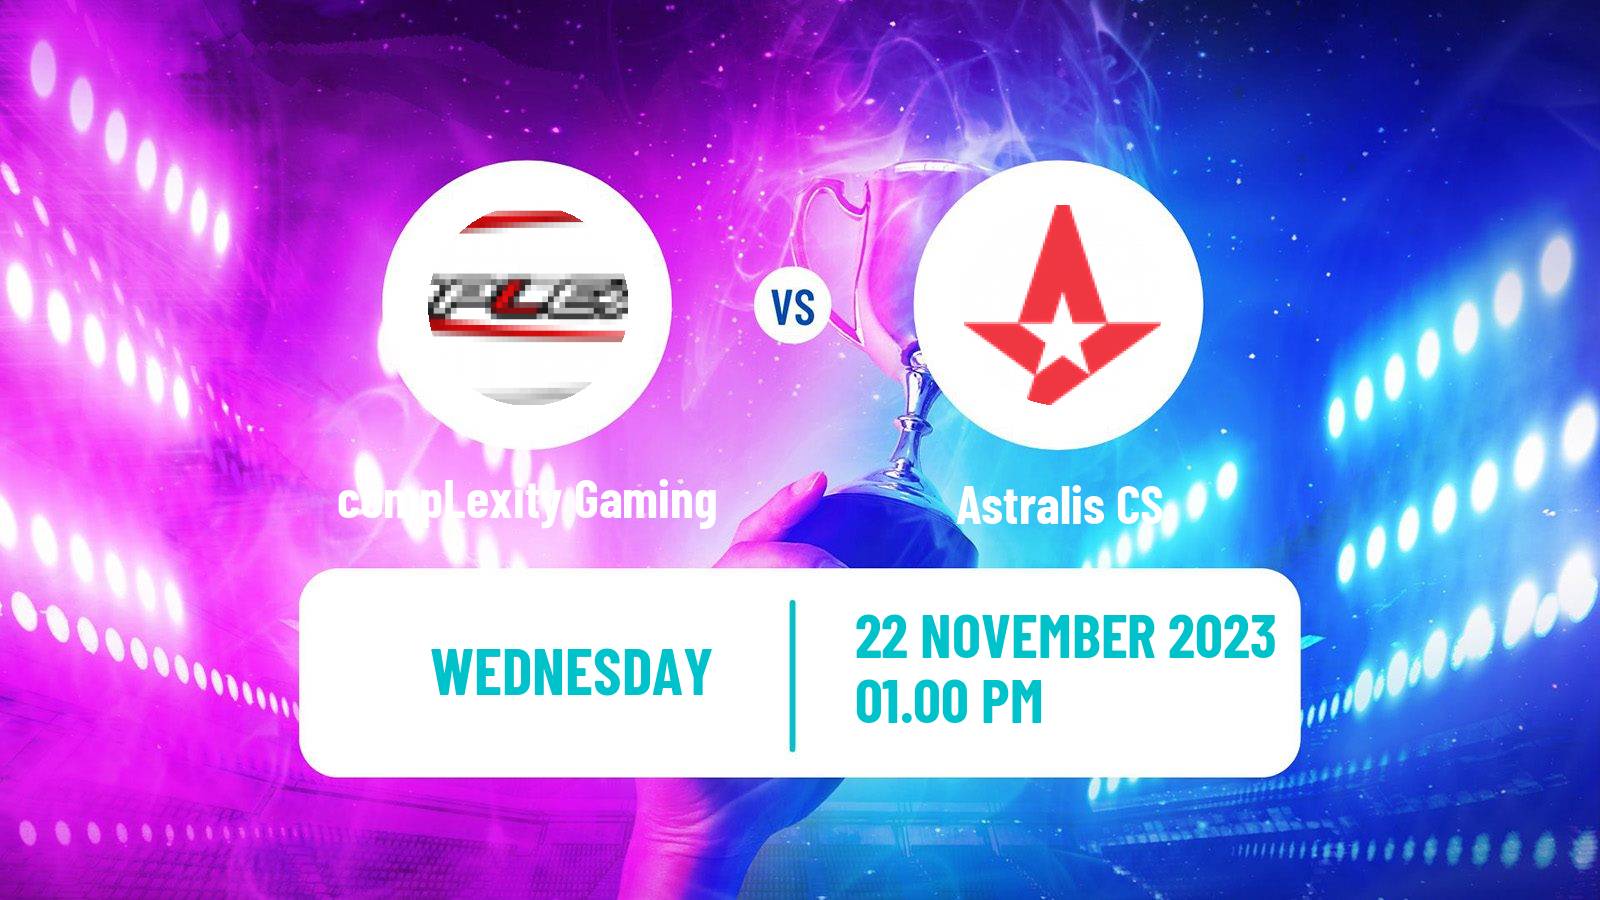 Esports Counter Strike Blast Premier Fall compLexity Gaming - Astralis